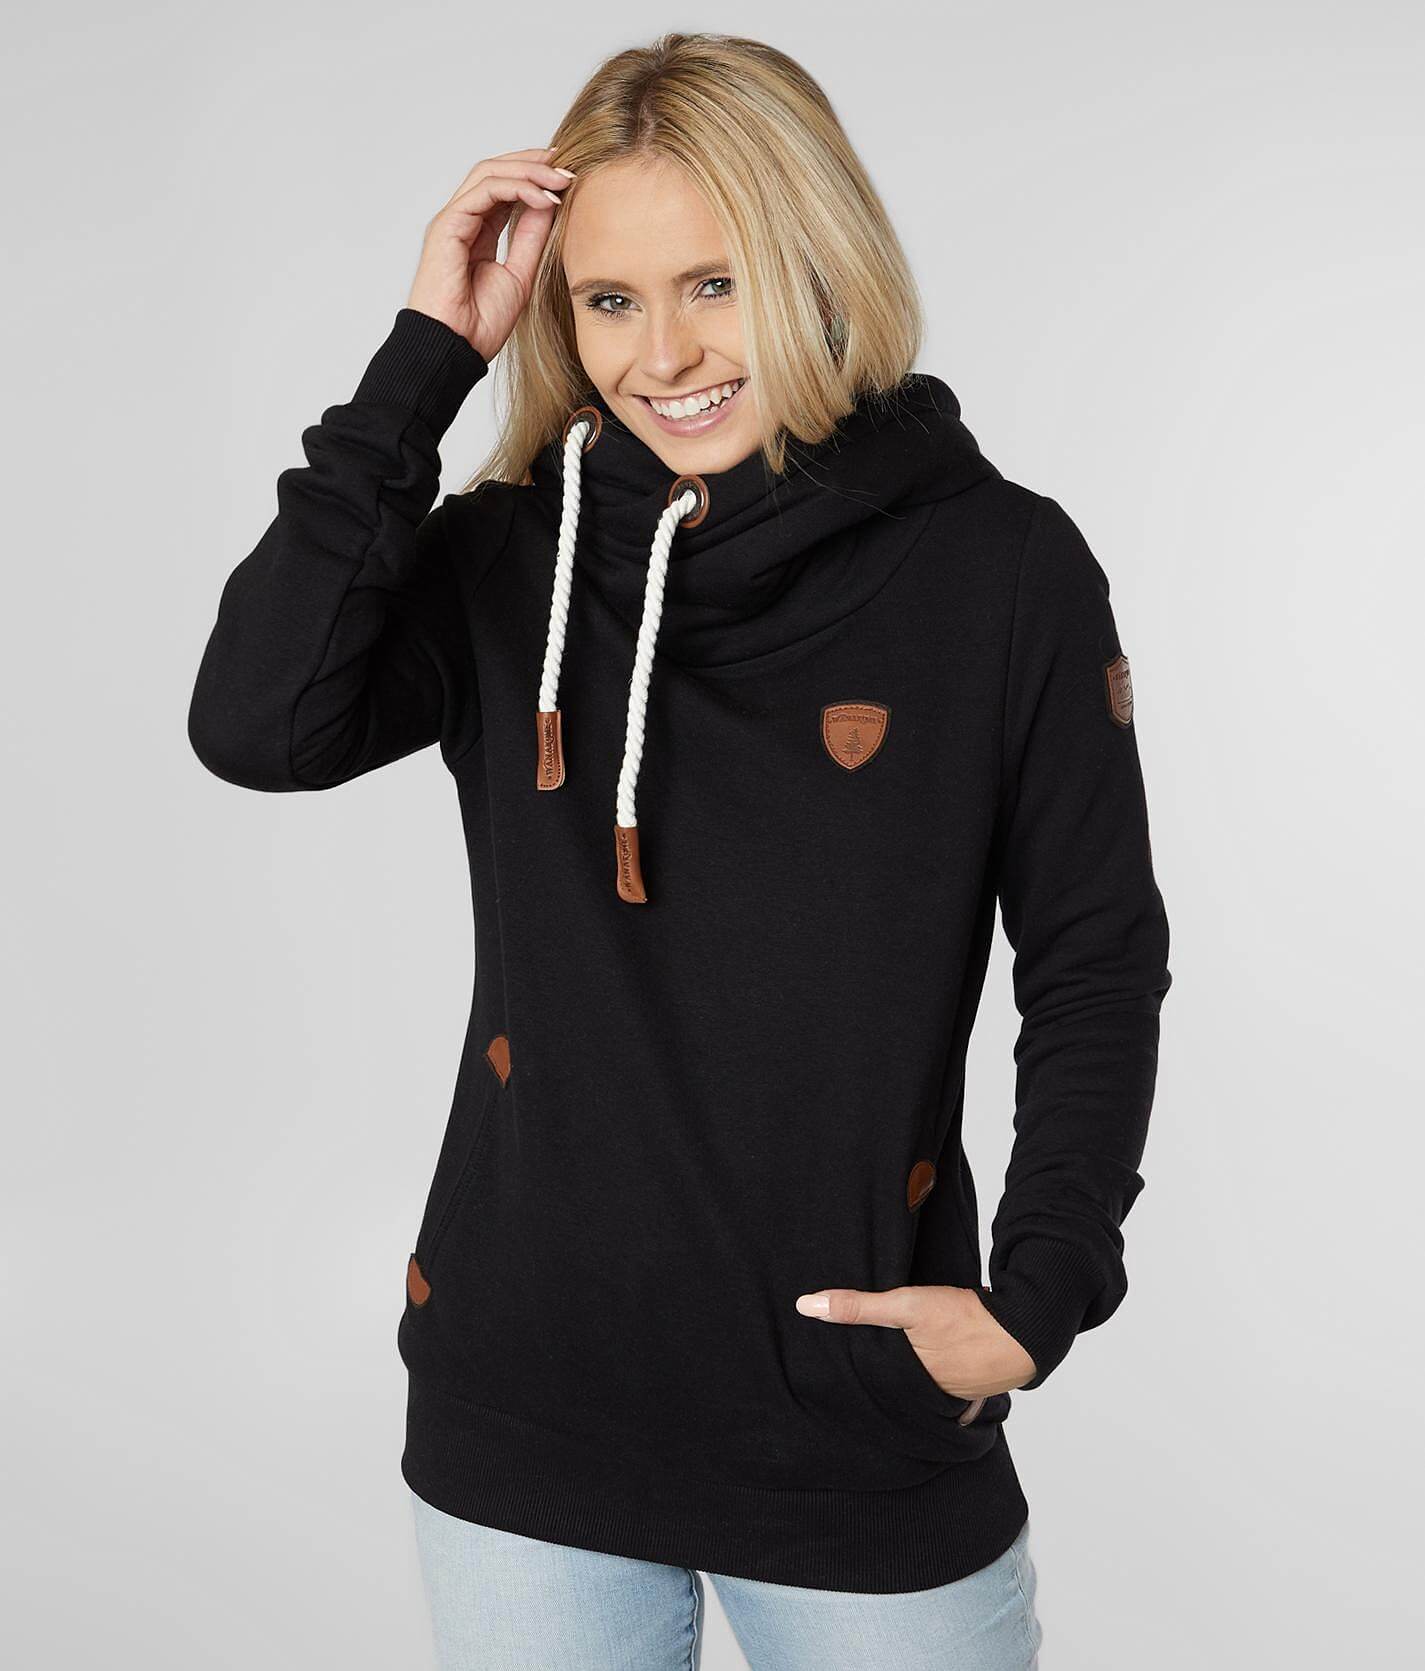 plus size hoodies afterpay